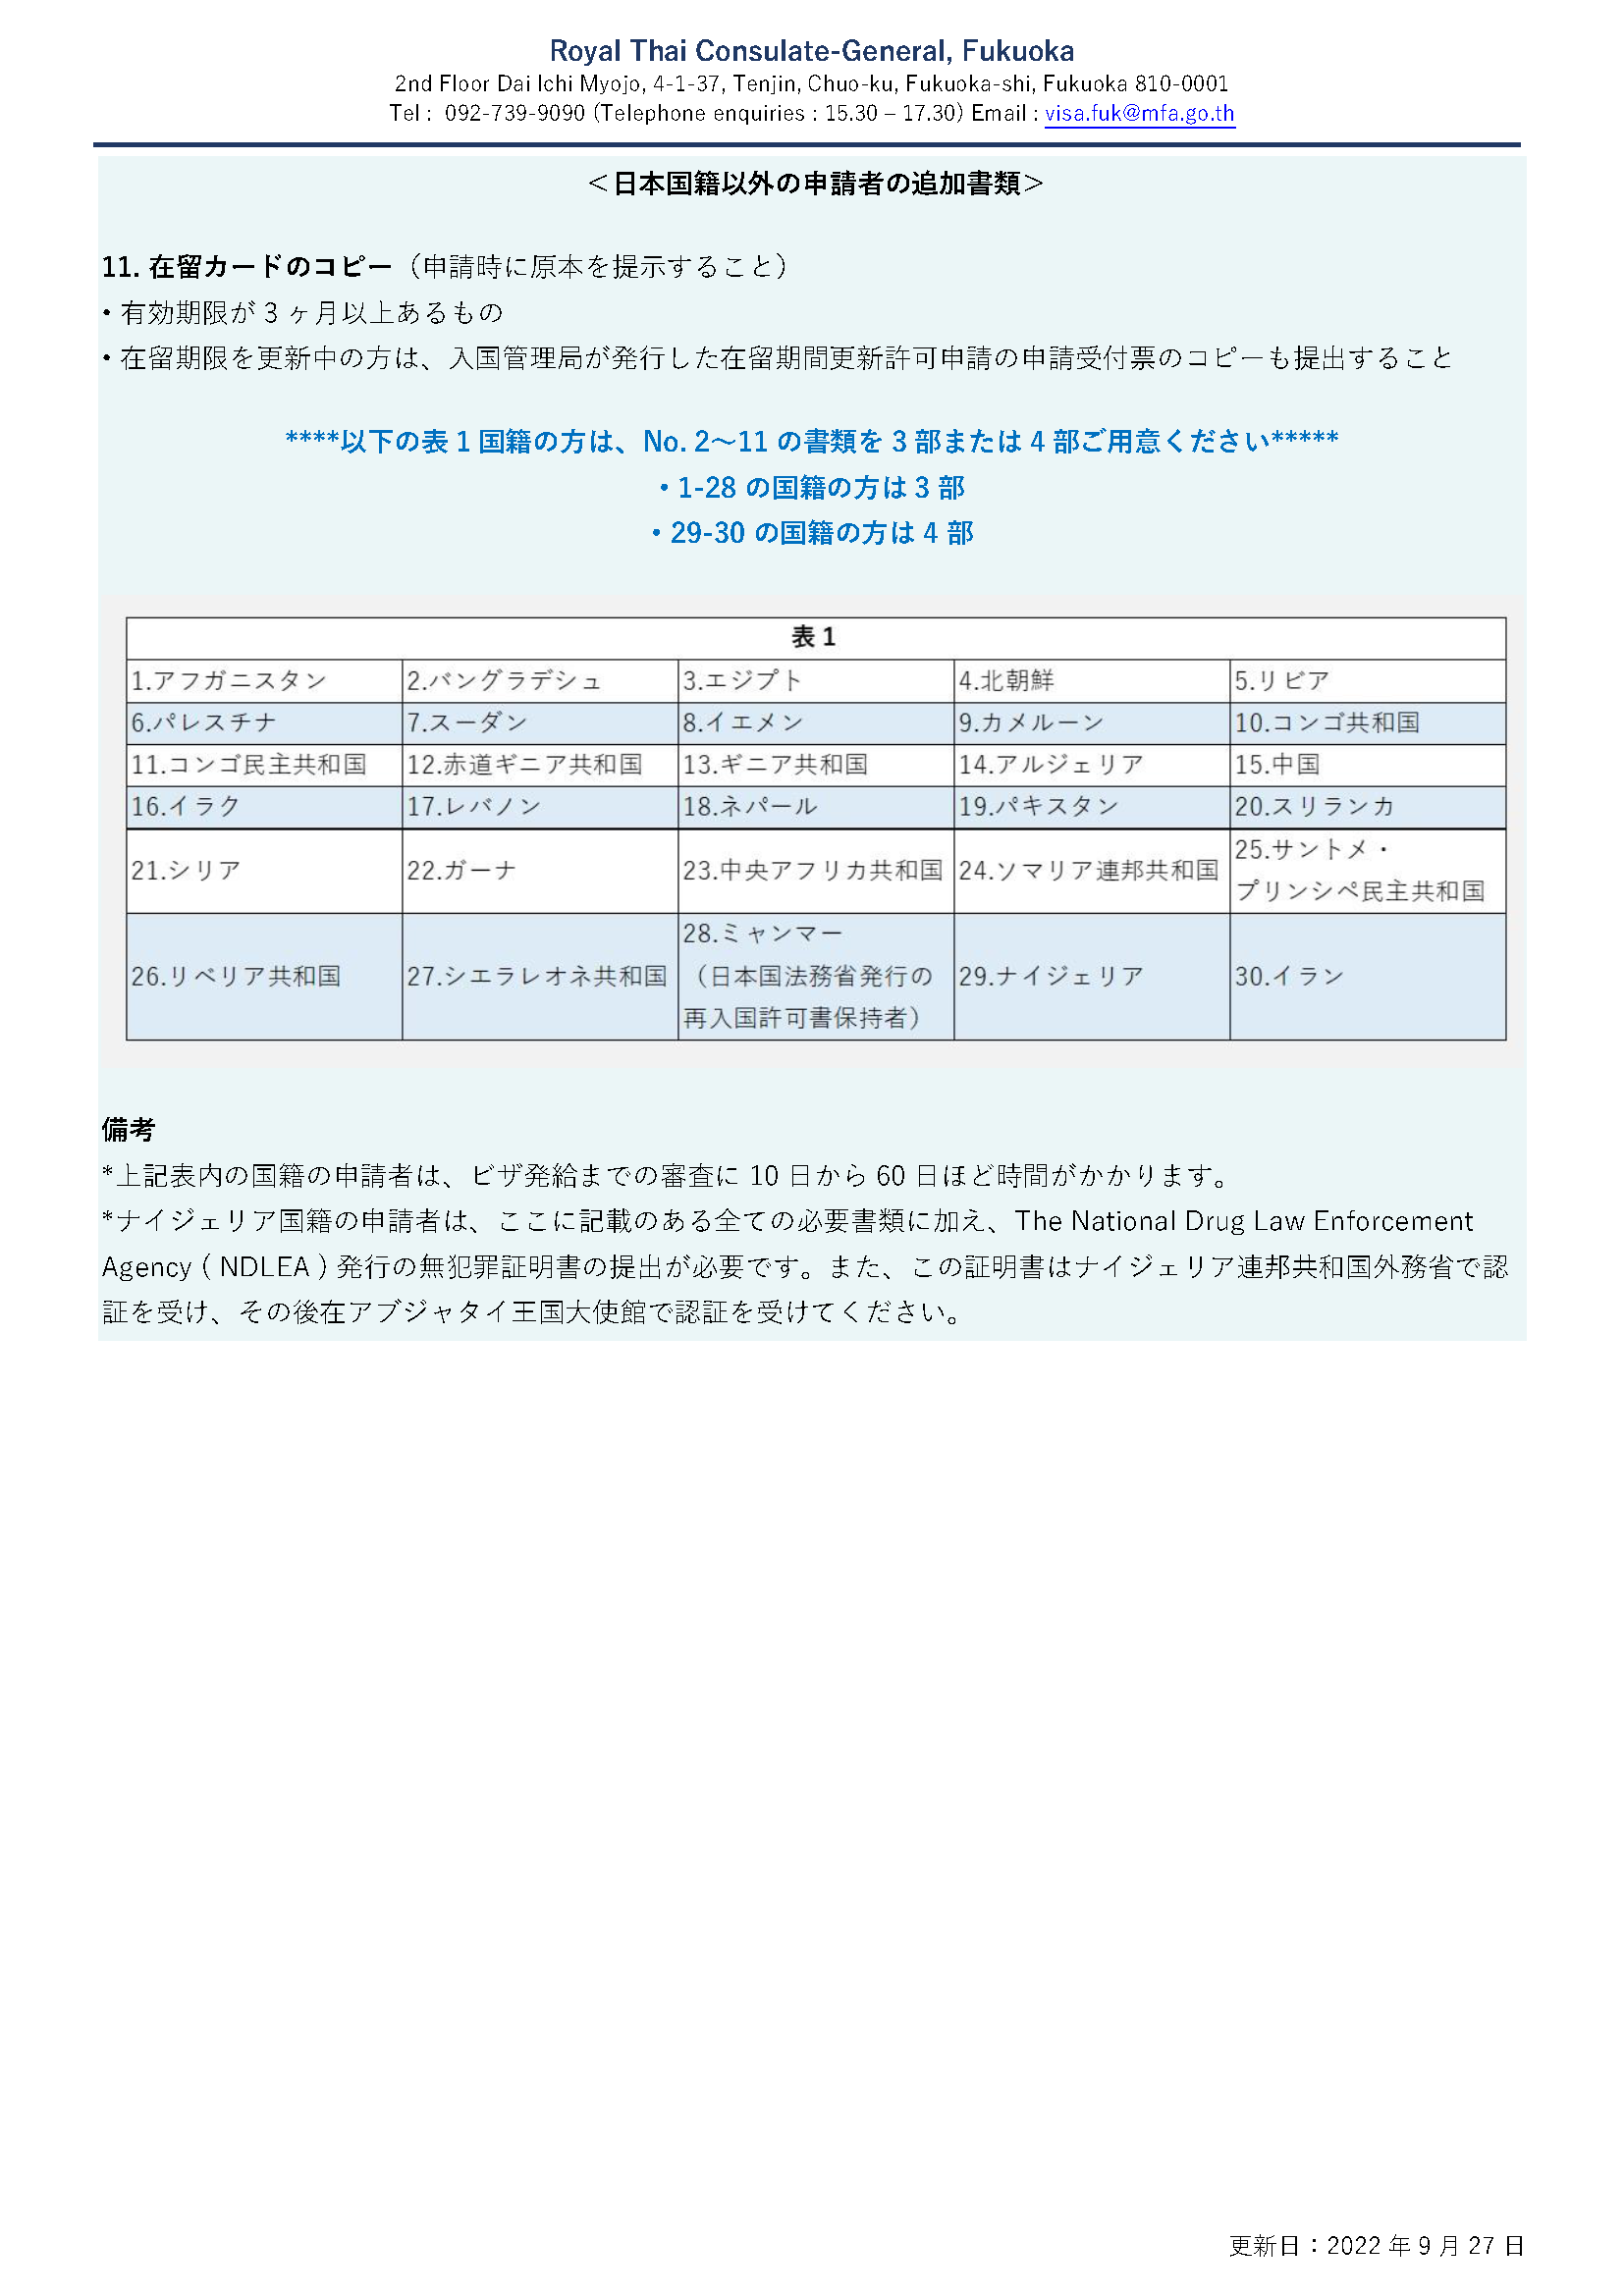 6._JP_Non-Immigrant_O_(Parent_or_Guardiand_of_Student)_Page_3